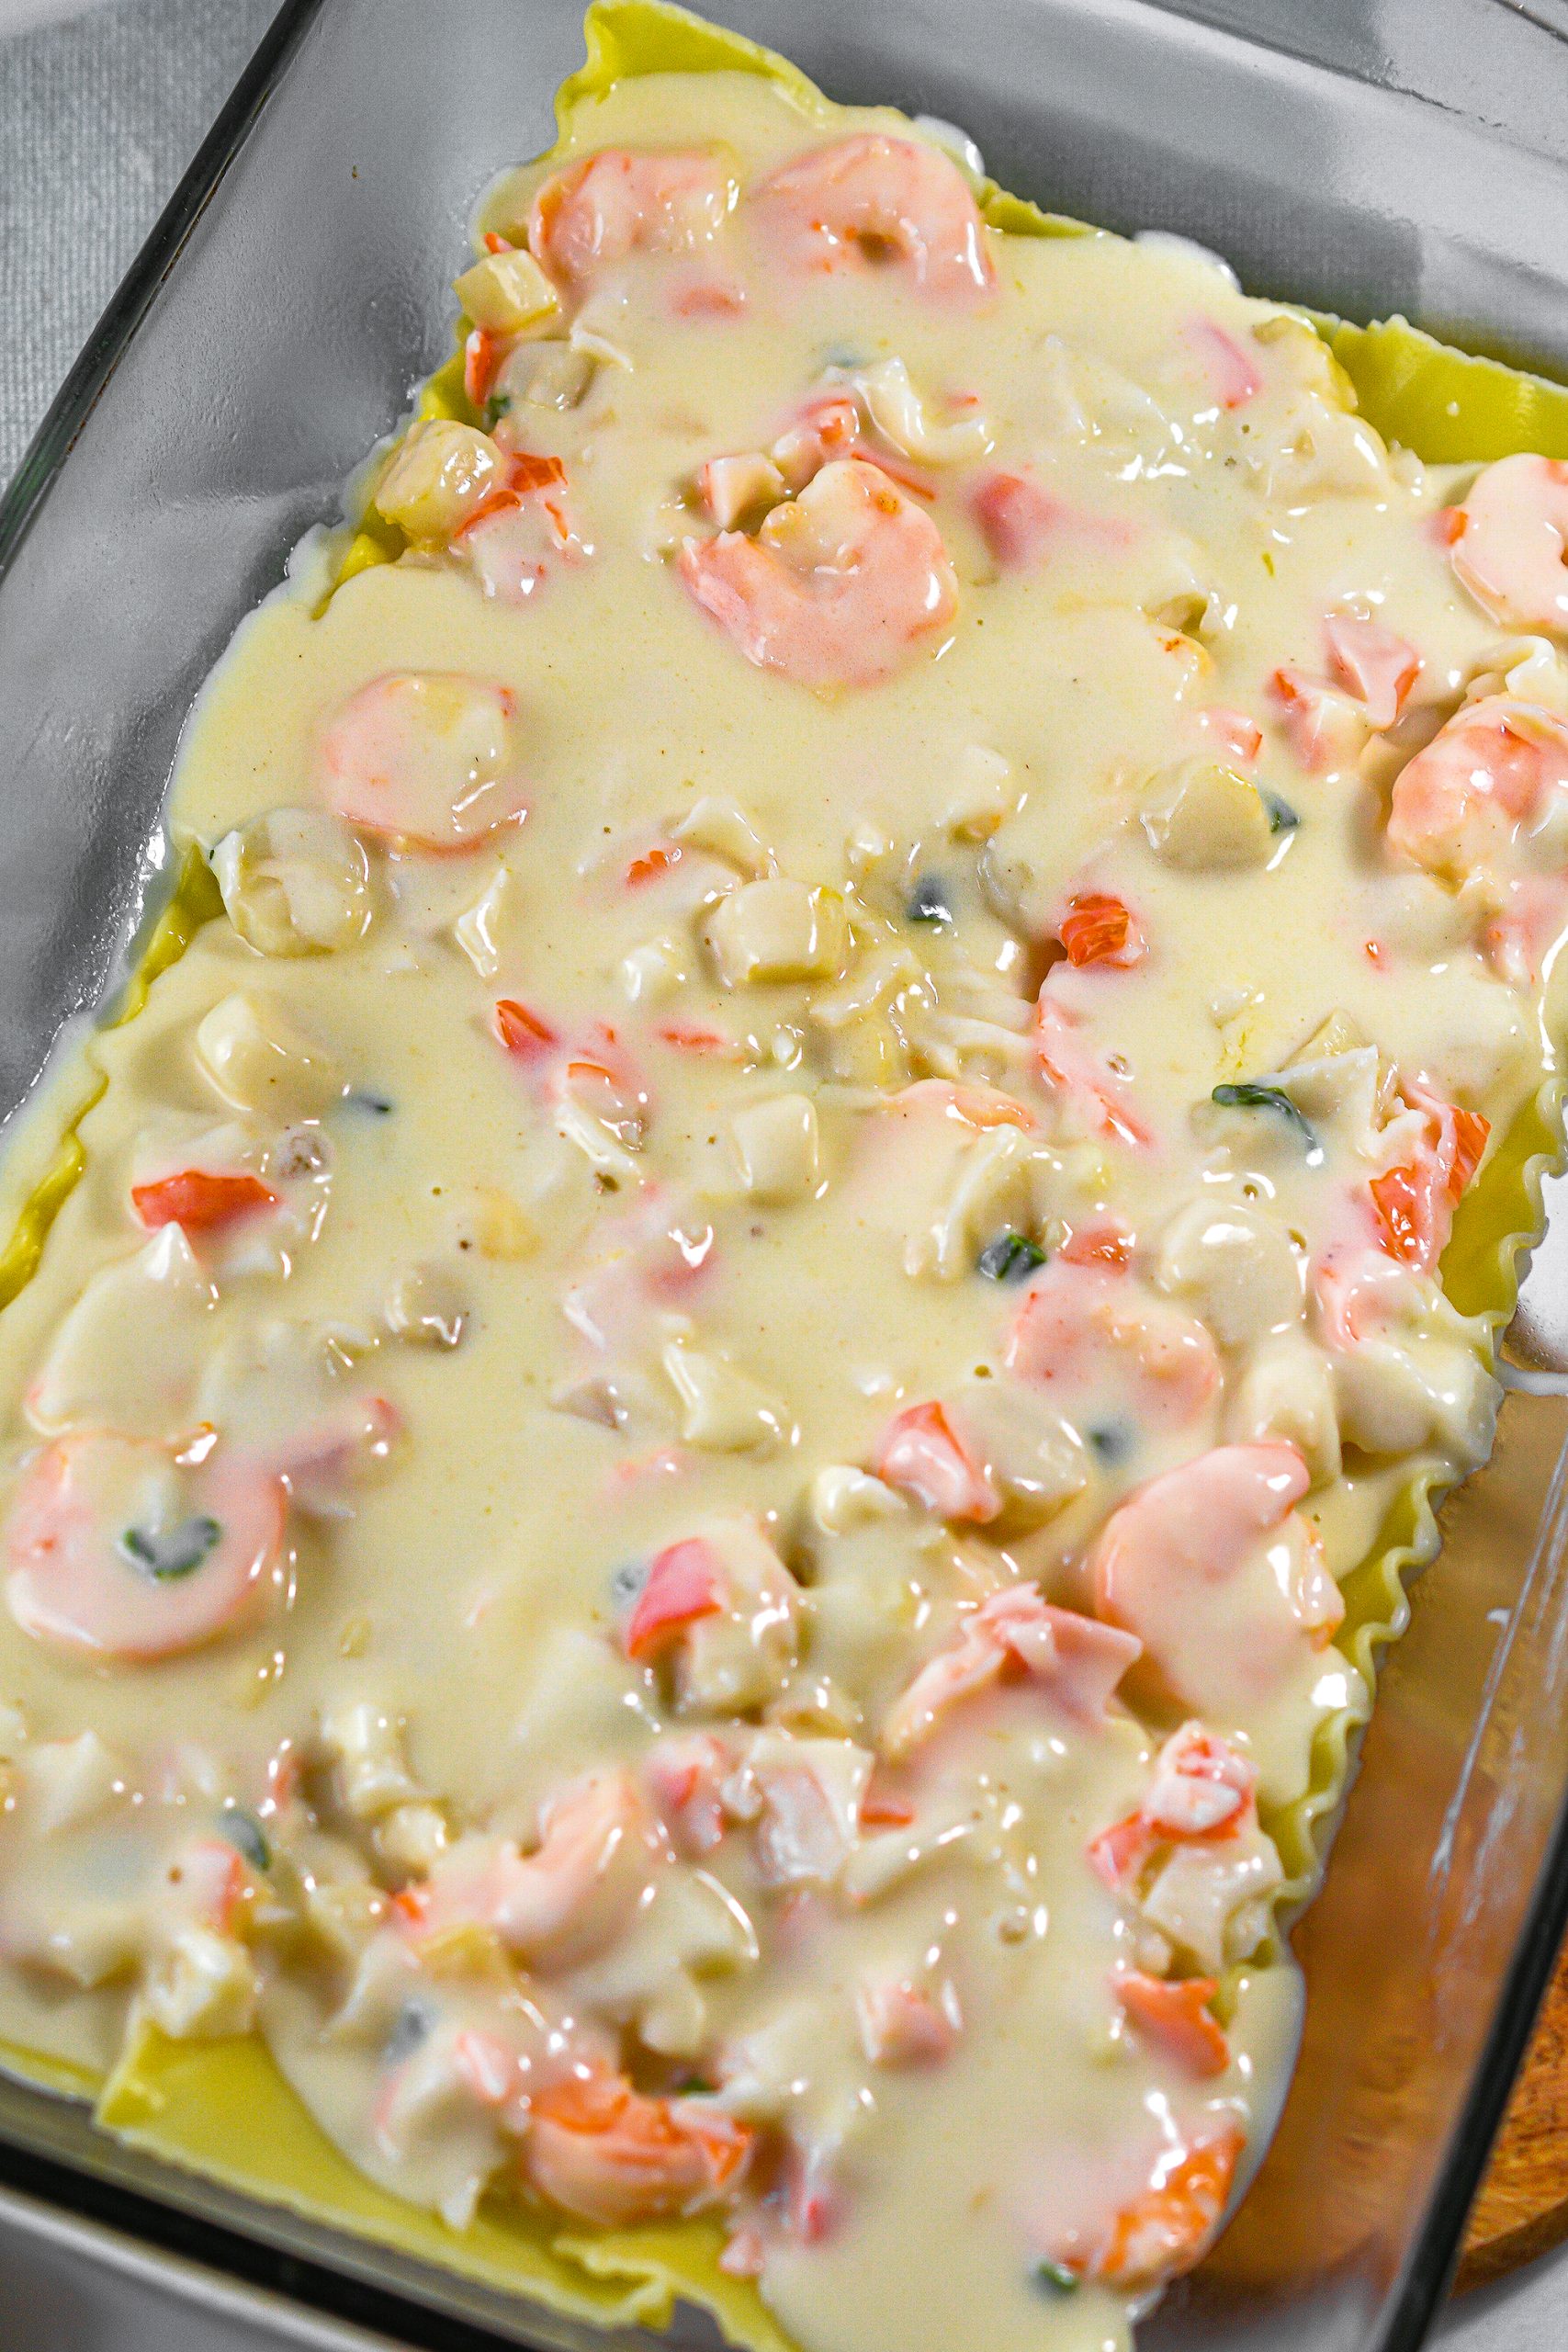 Pour 1 ½ cup sauce over the seafood in the baking dish.